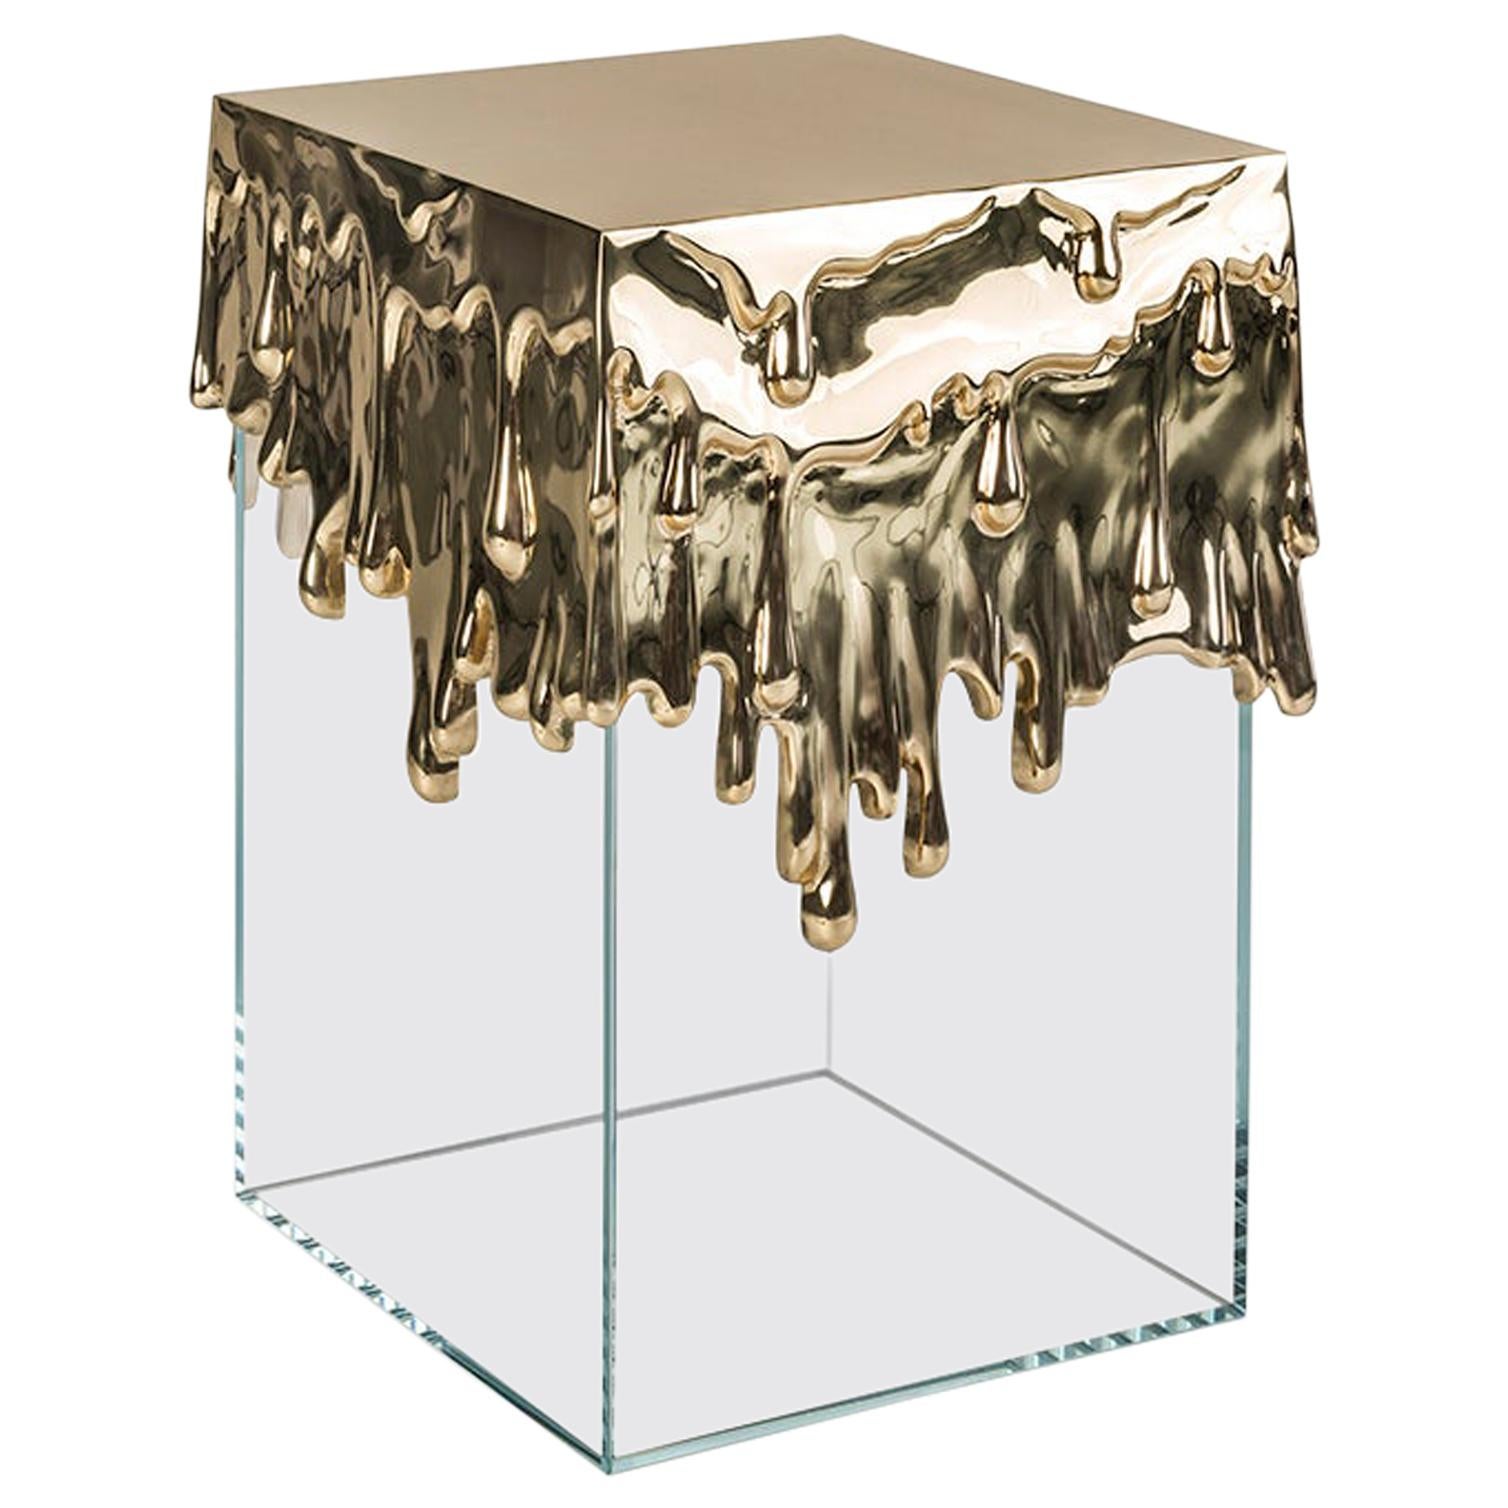 Modern Art Candle Side Table in Polished Brass Cast and Glass Base, Metal Work